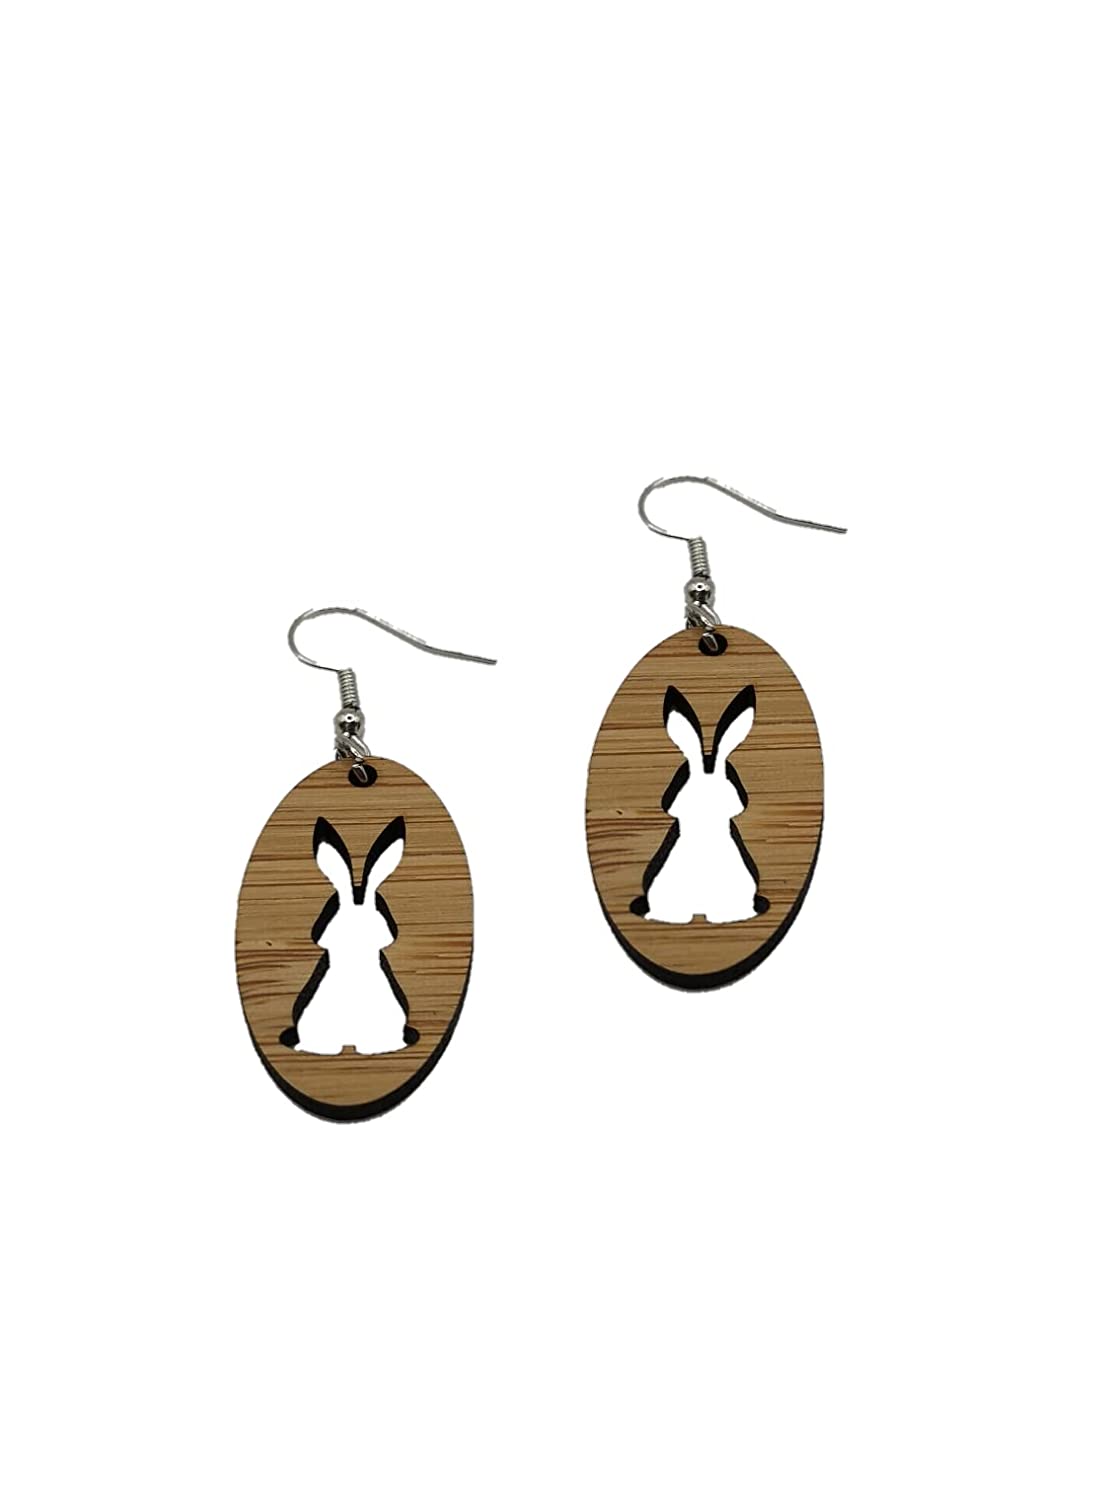 Easter Egg Bunny Bamboo Earrings - customise to suit your style with Gold, Rose Gold, Dark Gold or Silver findings (One of each style)